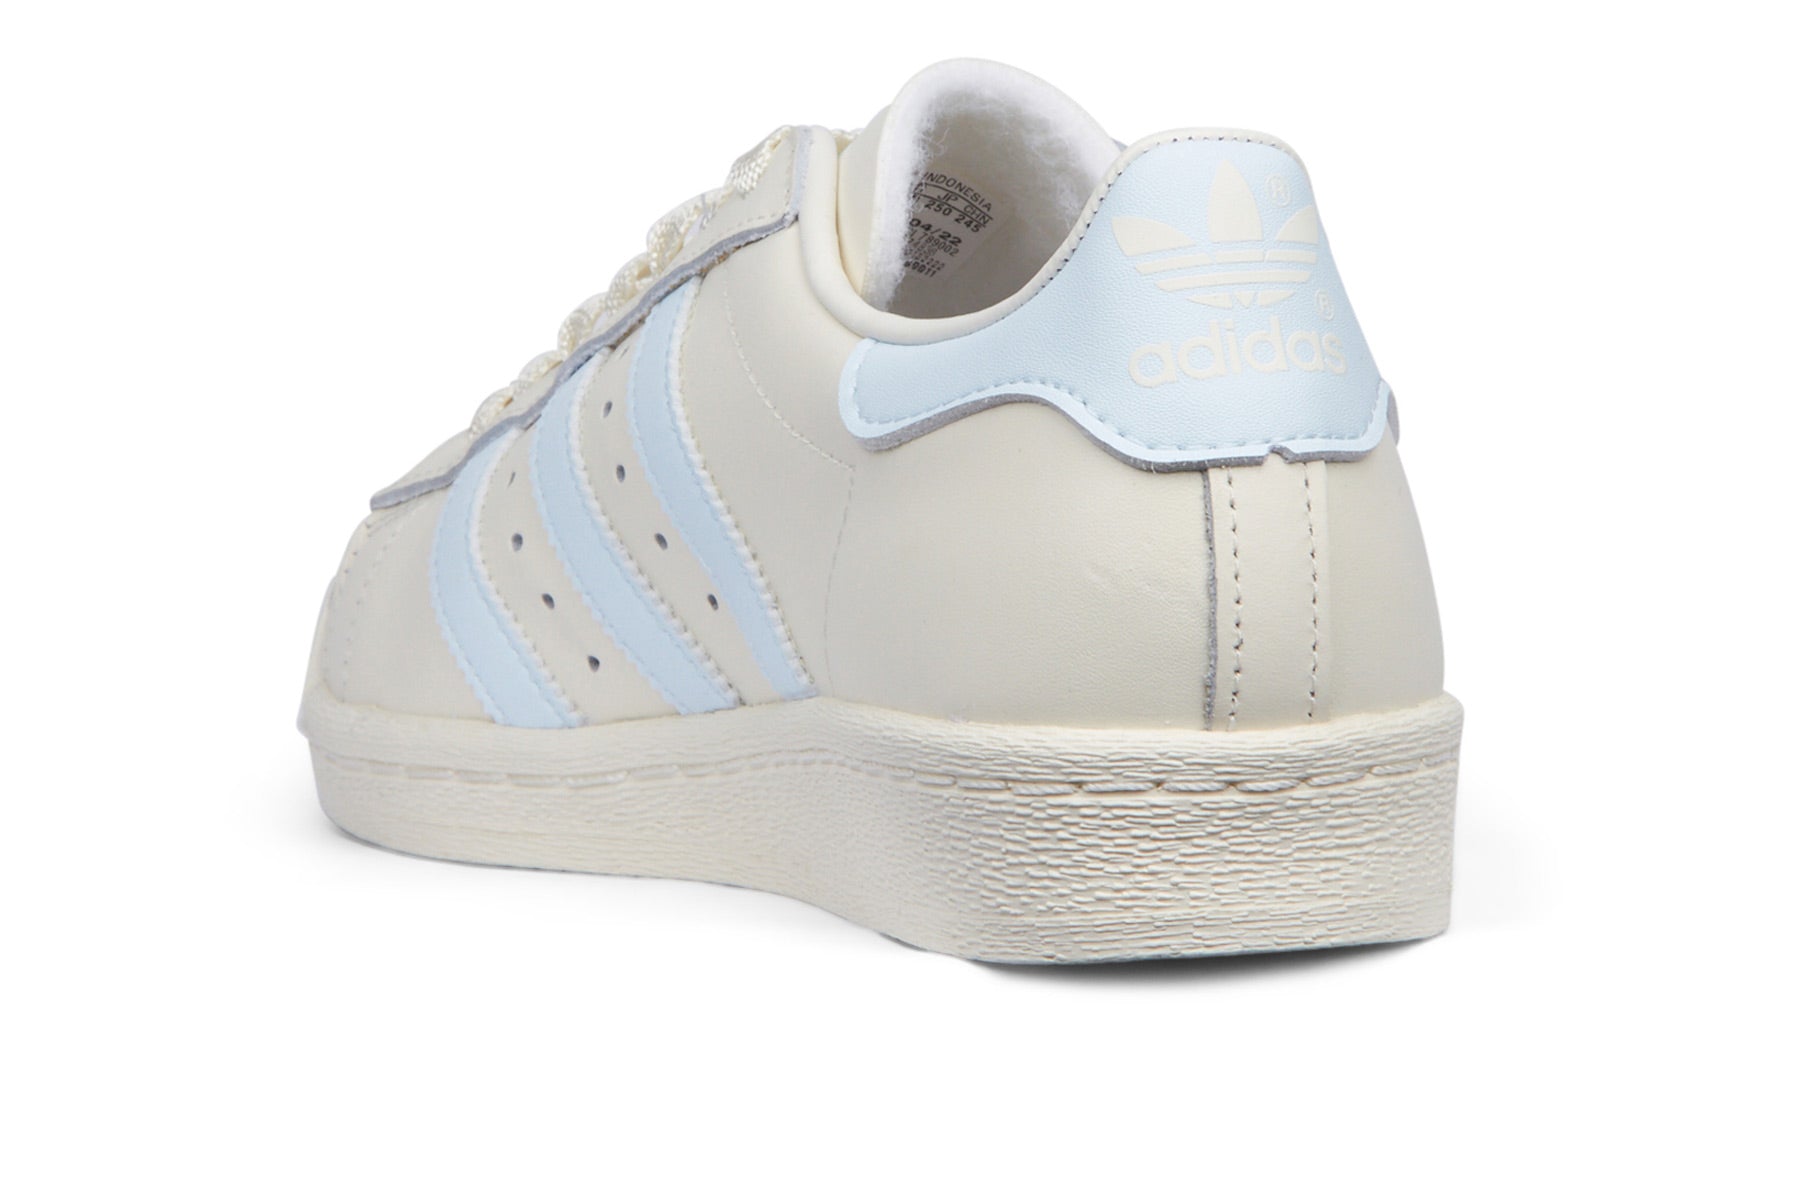 Adidas Superstar 82 - Cloud White/Sky Tint/Off White